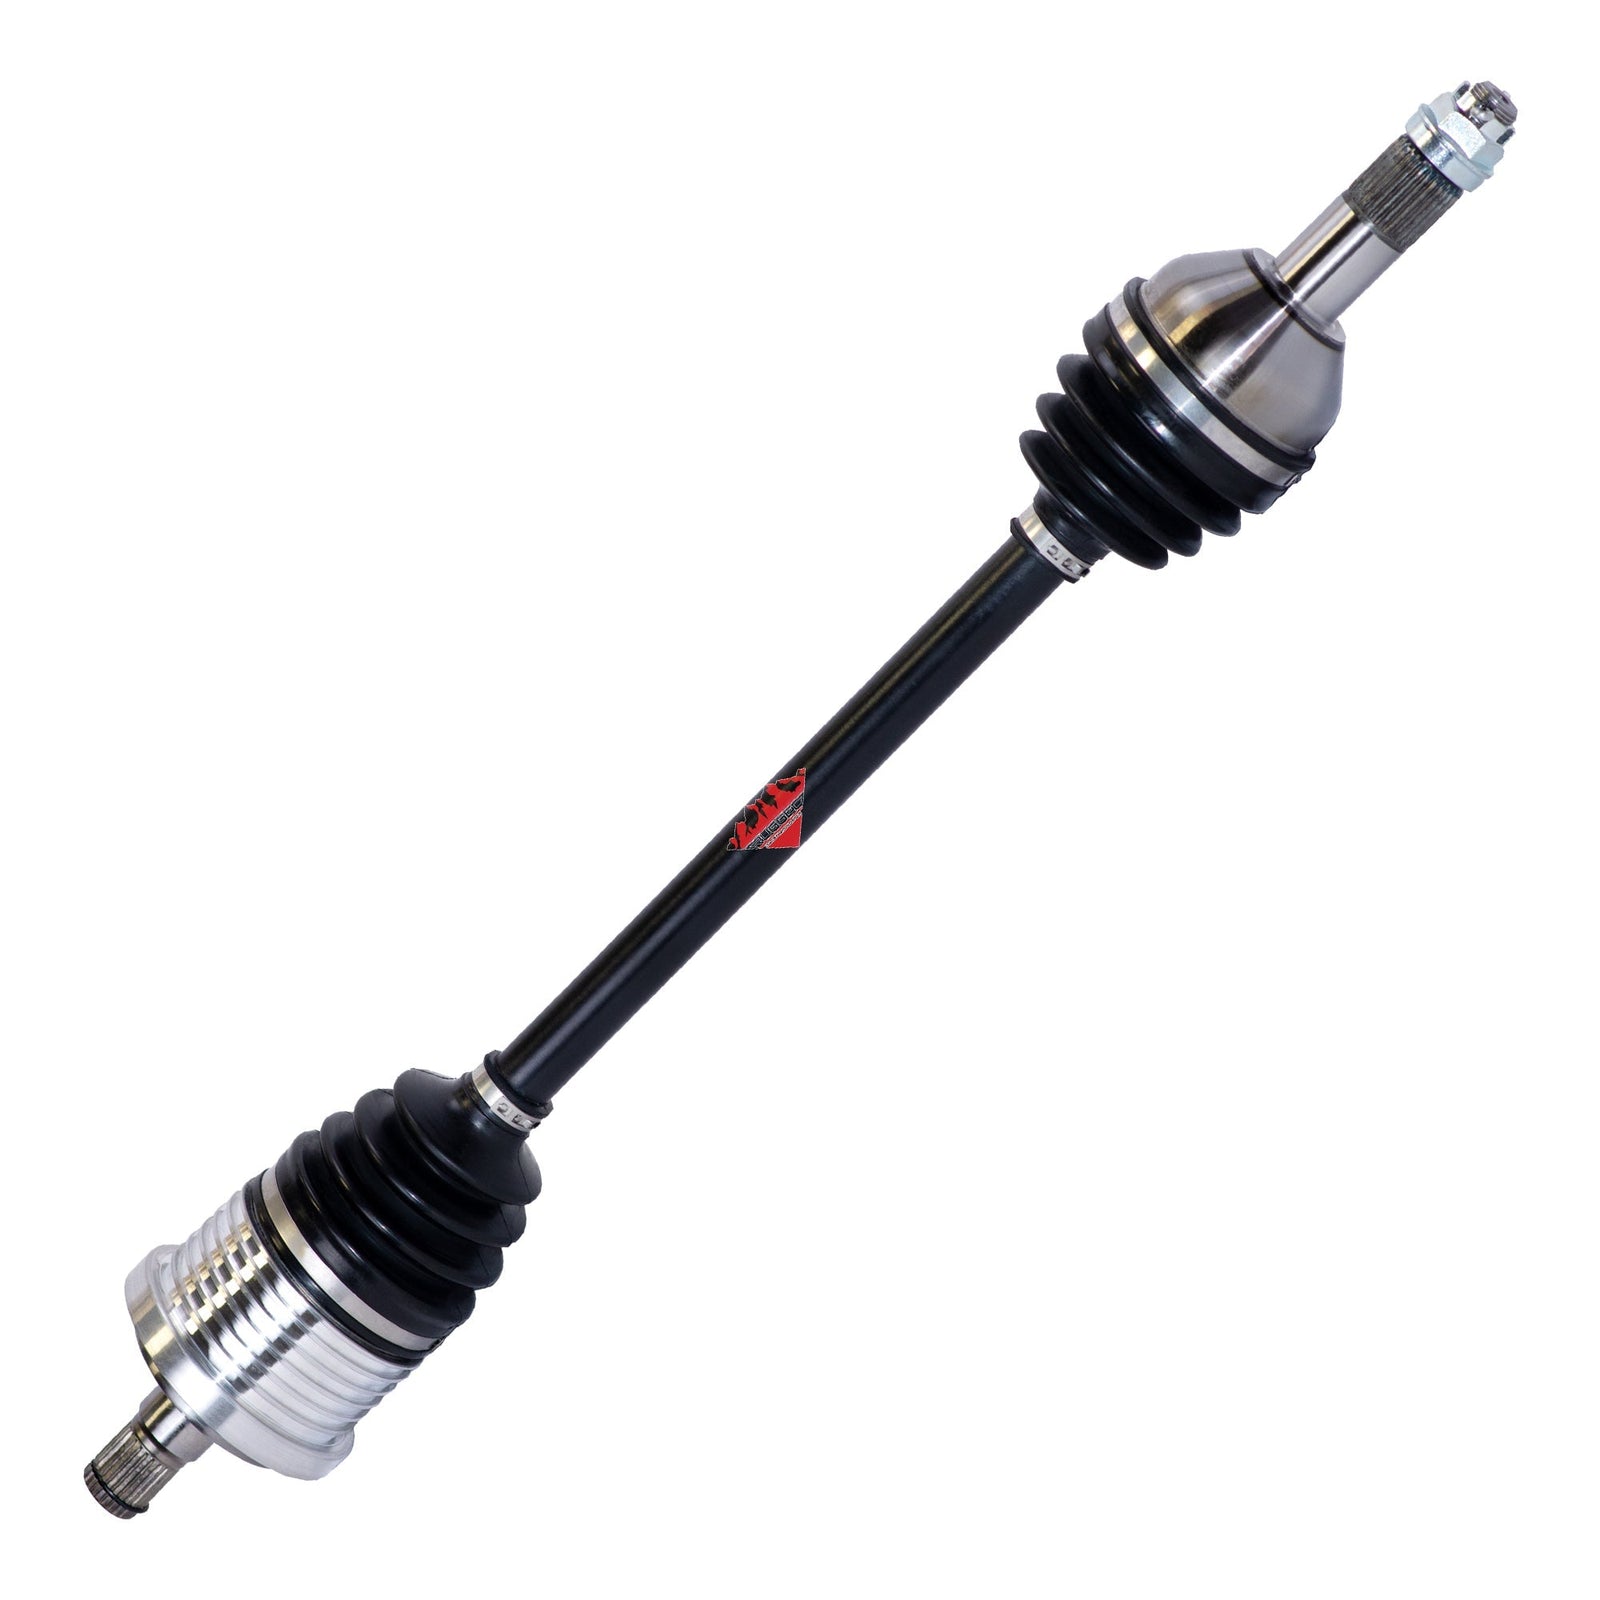 Arctic Cat Prowler 550 Rugged Performance Axle